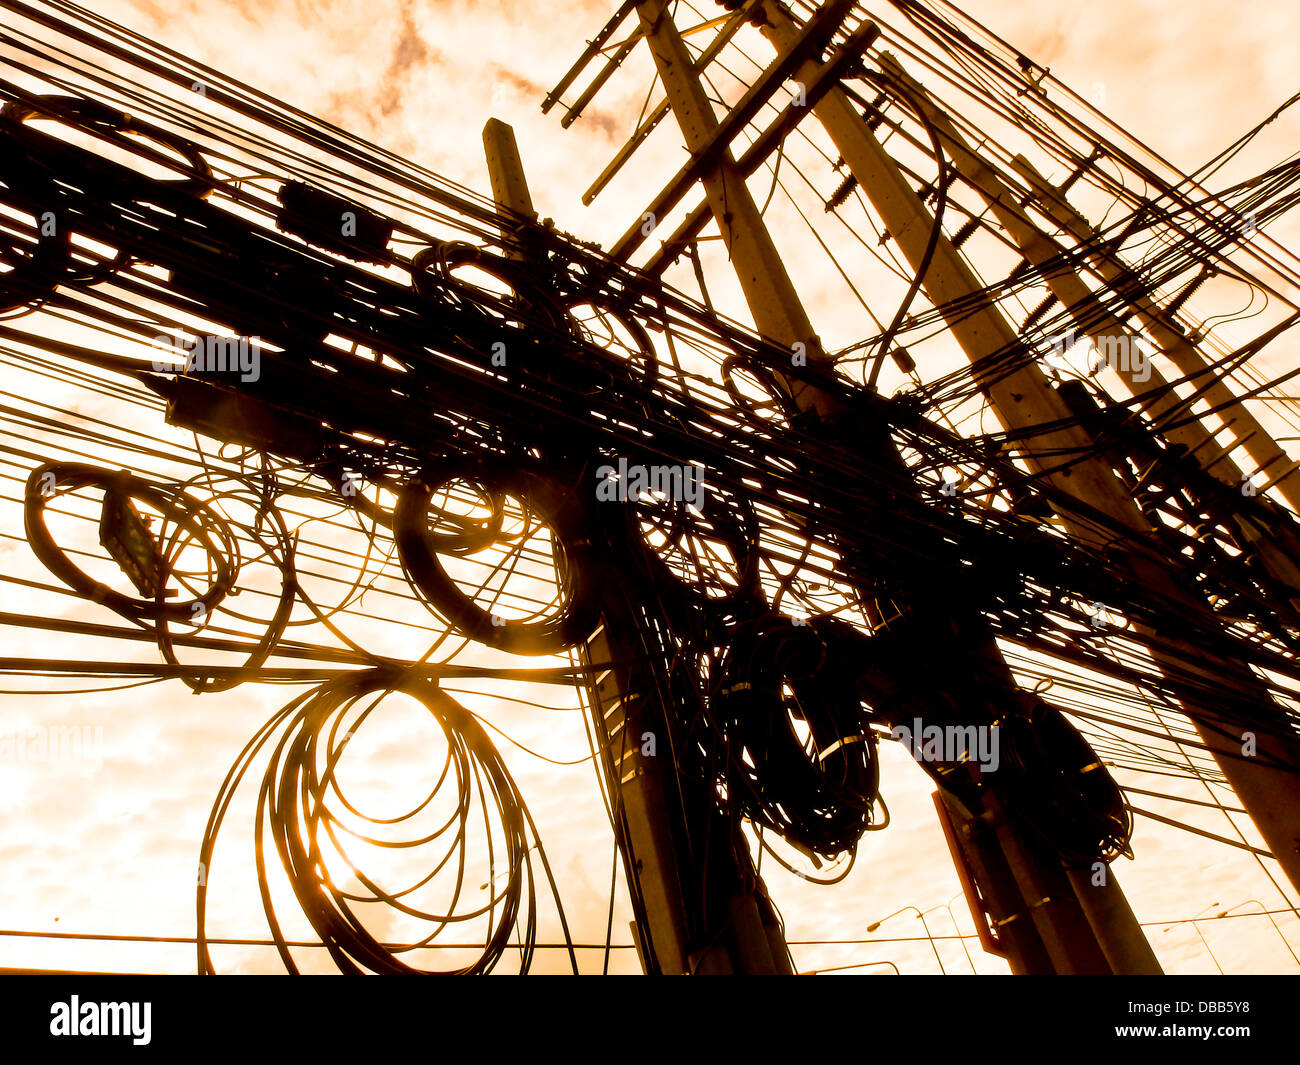 Tangled power lines. Stock Photo